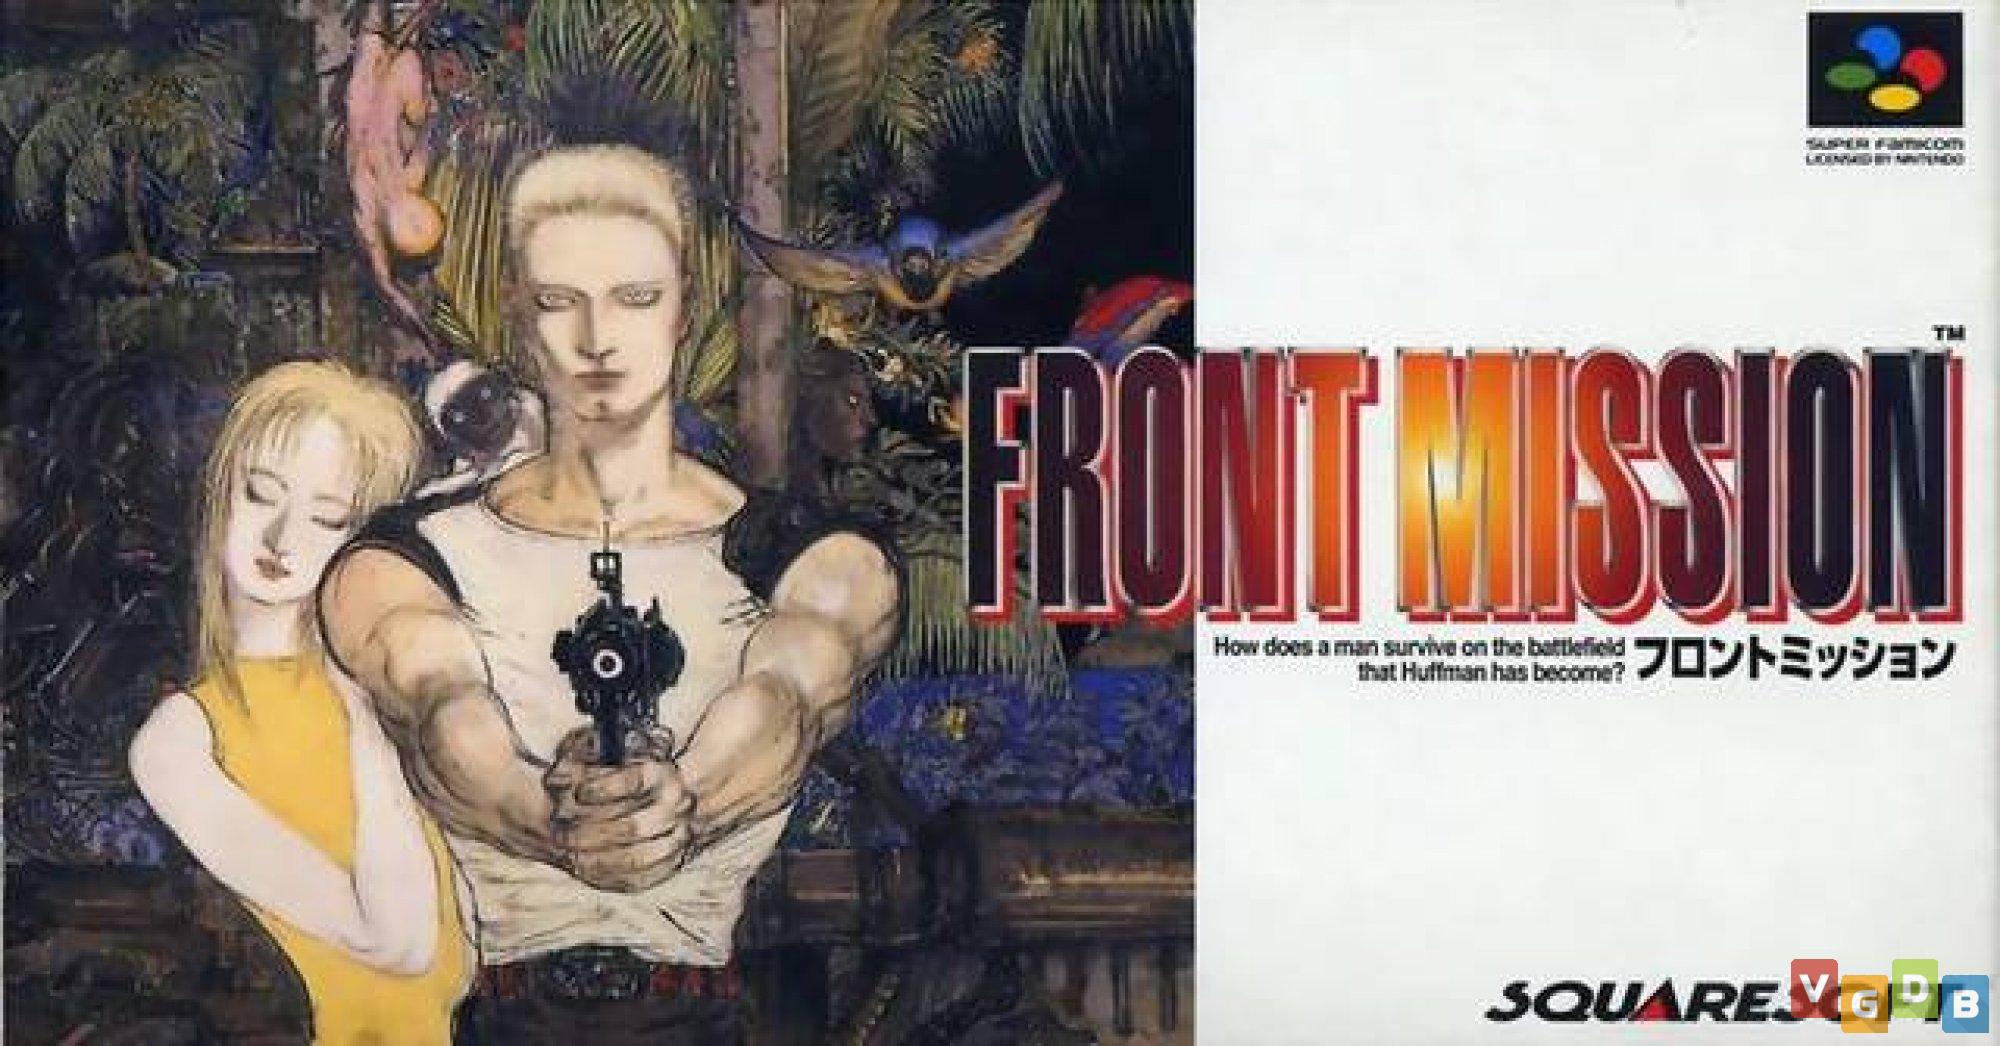 FRONT MISSION 1st: Remake download the new for android